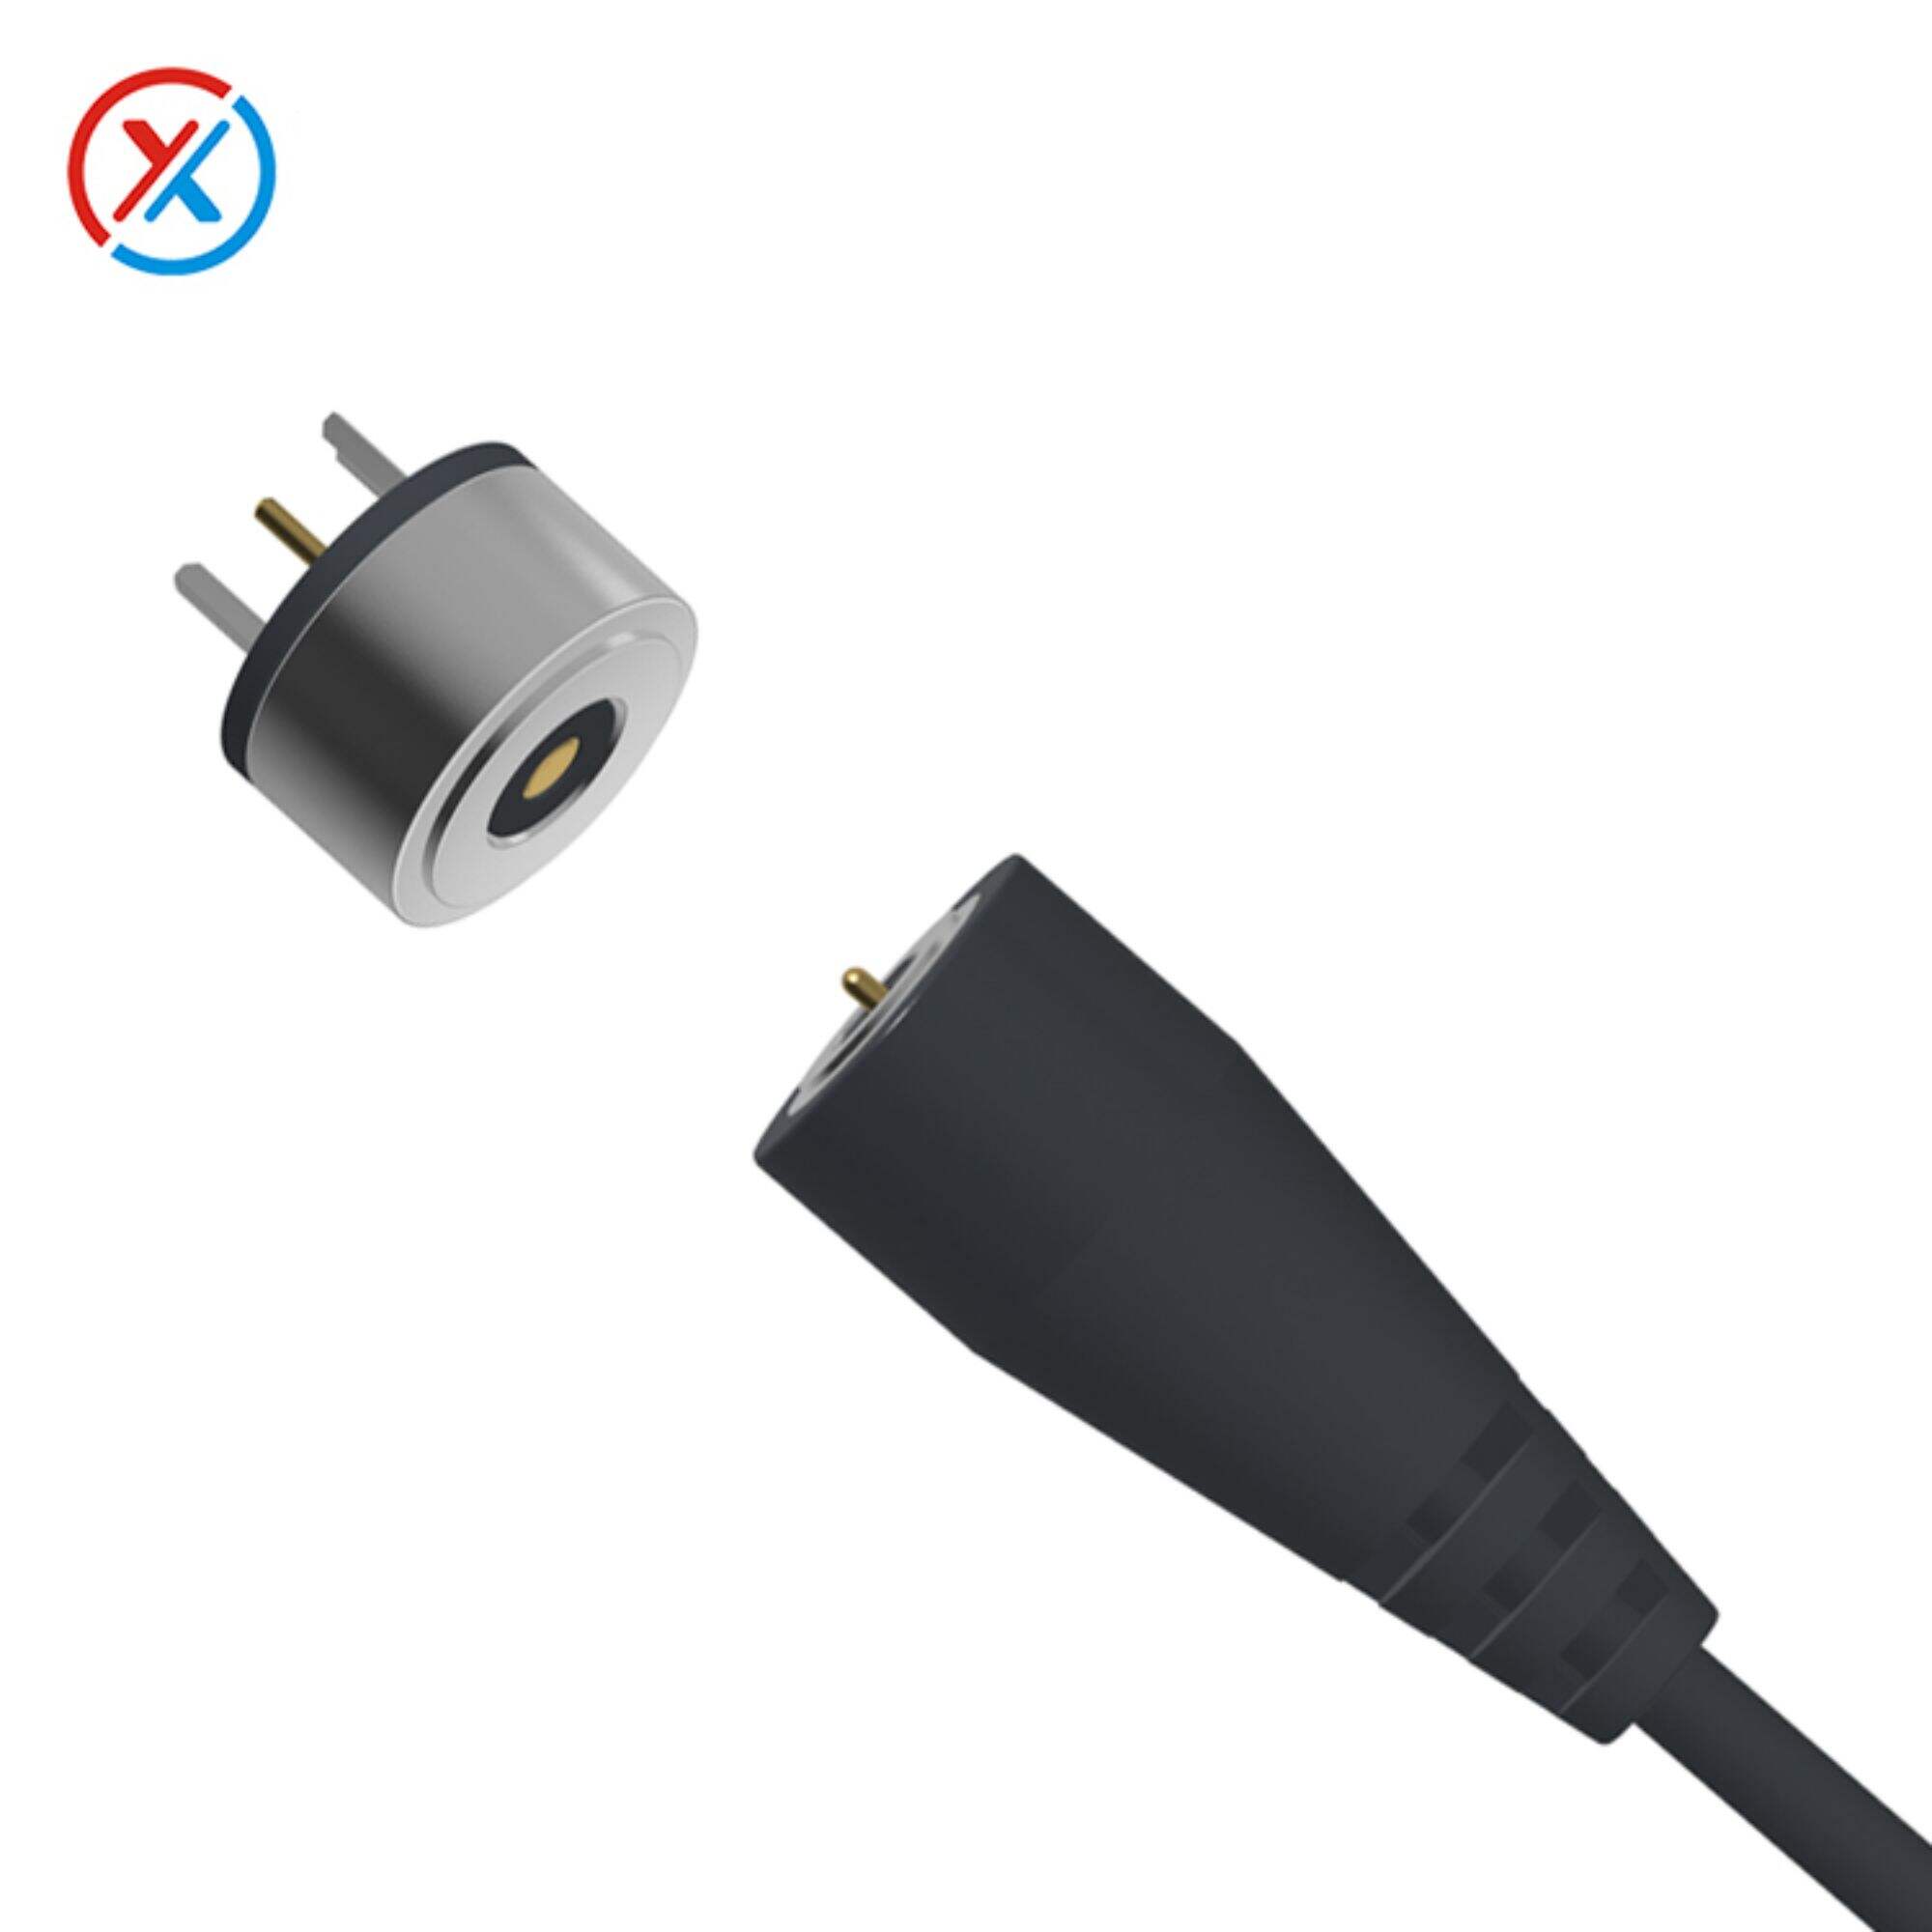 Affordable high quality round magnetic charging cables for e-cigarettes and toys,10mm male and female magnetic line